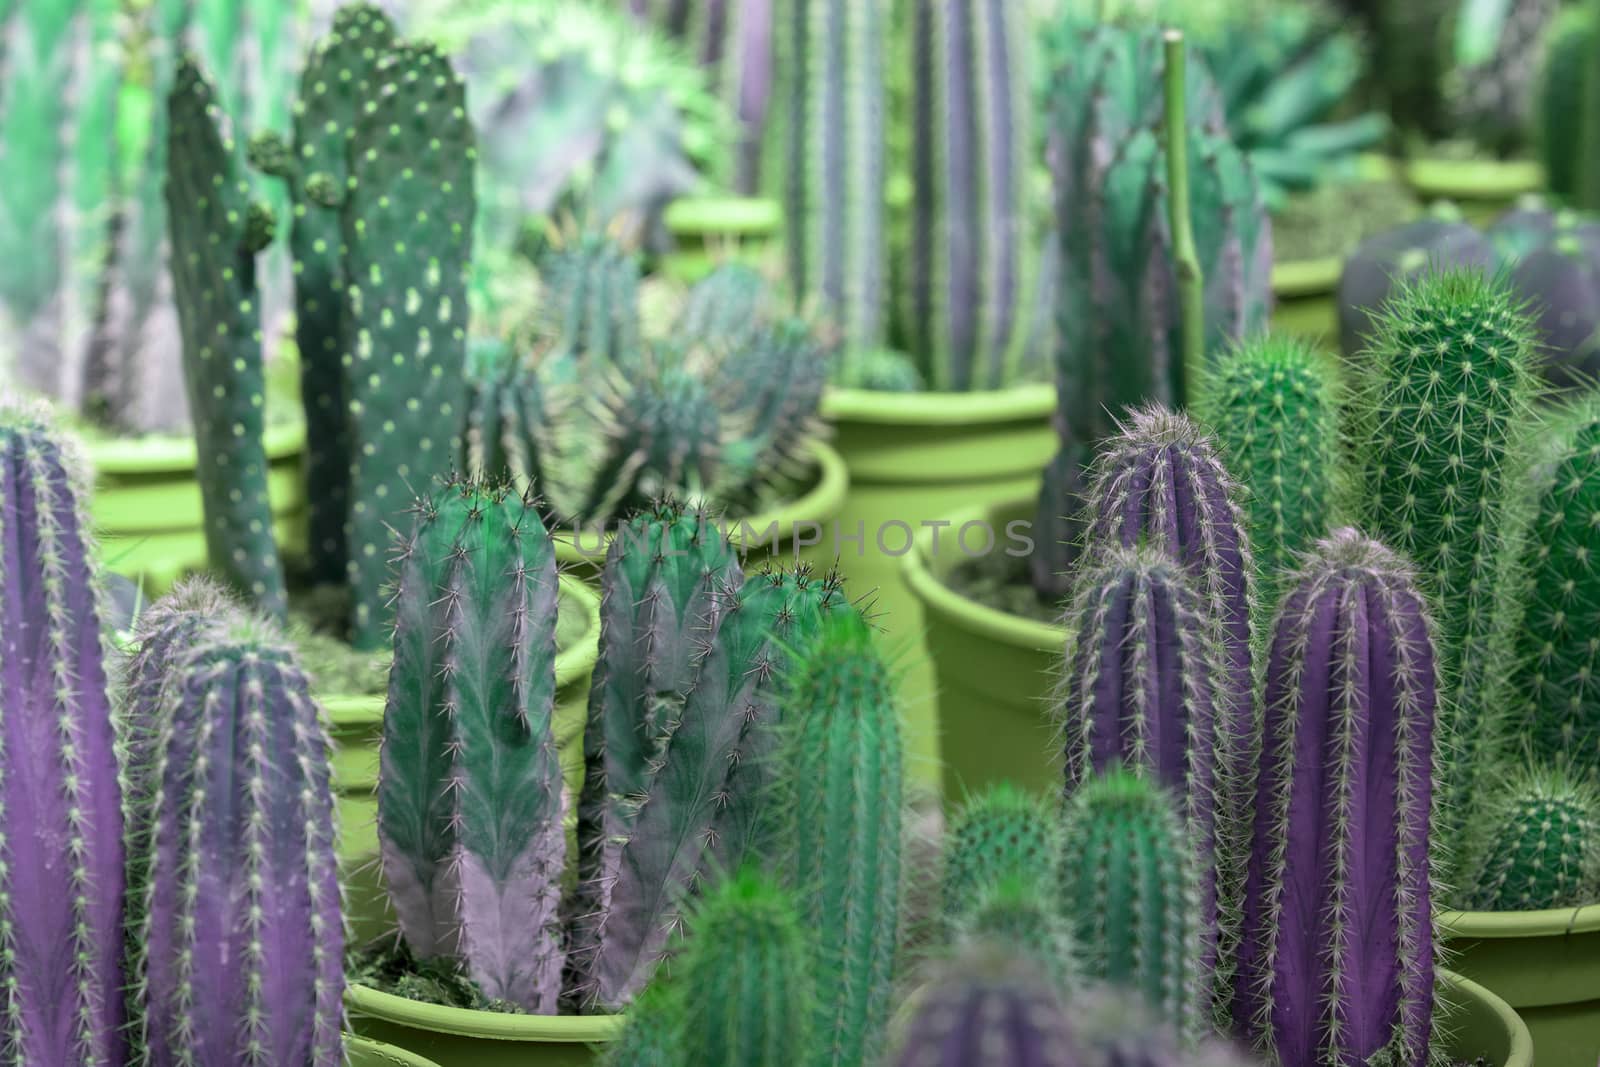 Abstract purple and green cactus plants in pots. Spring garden series, Mallorca, Spain.